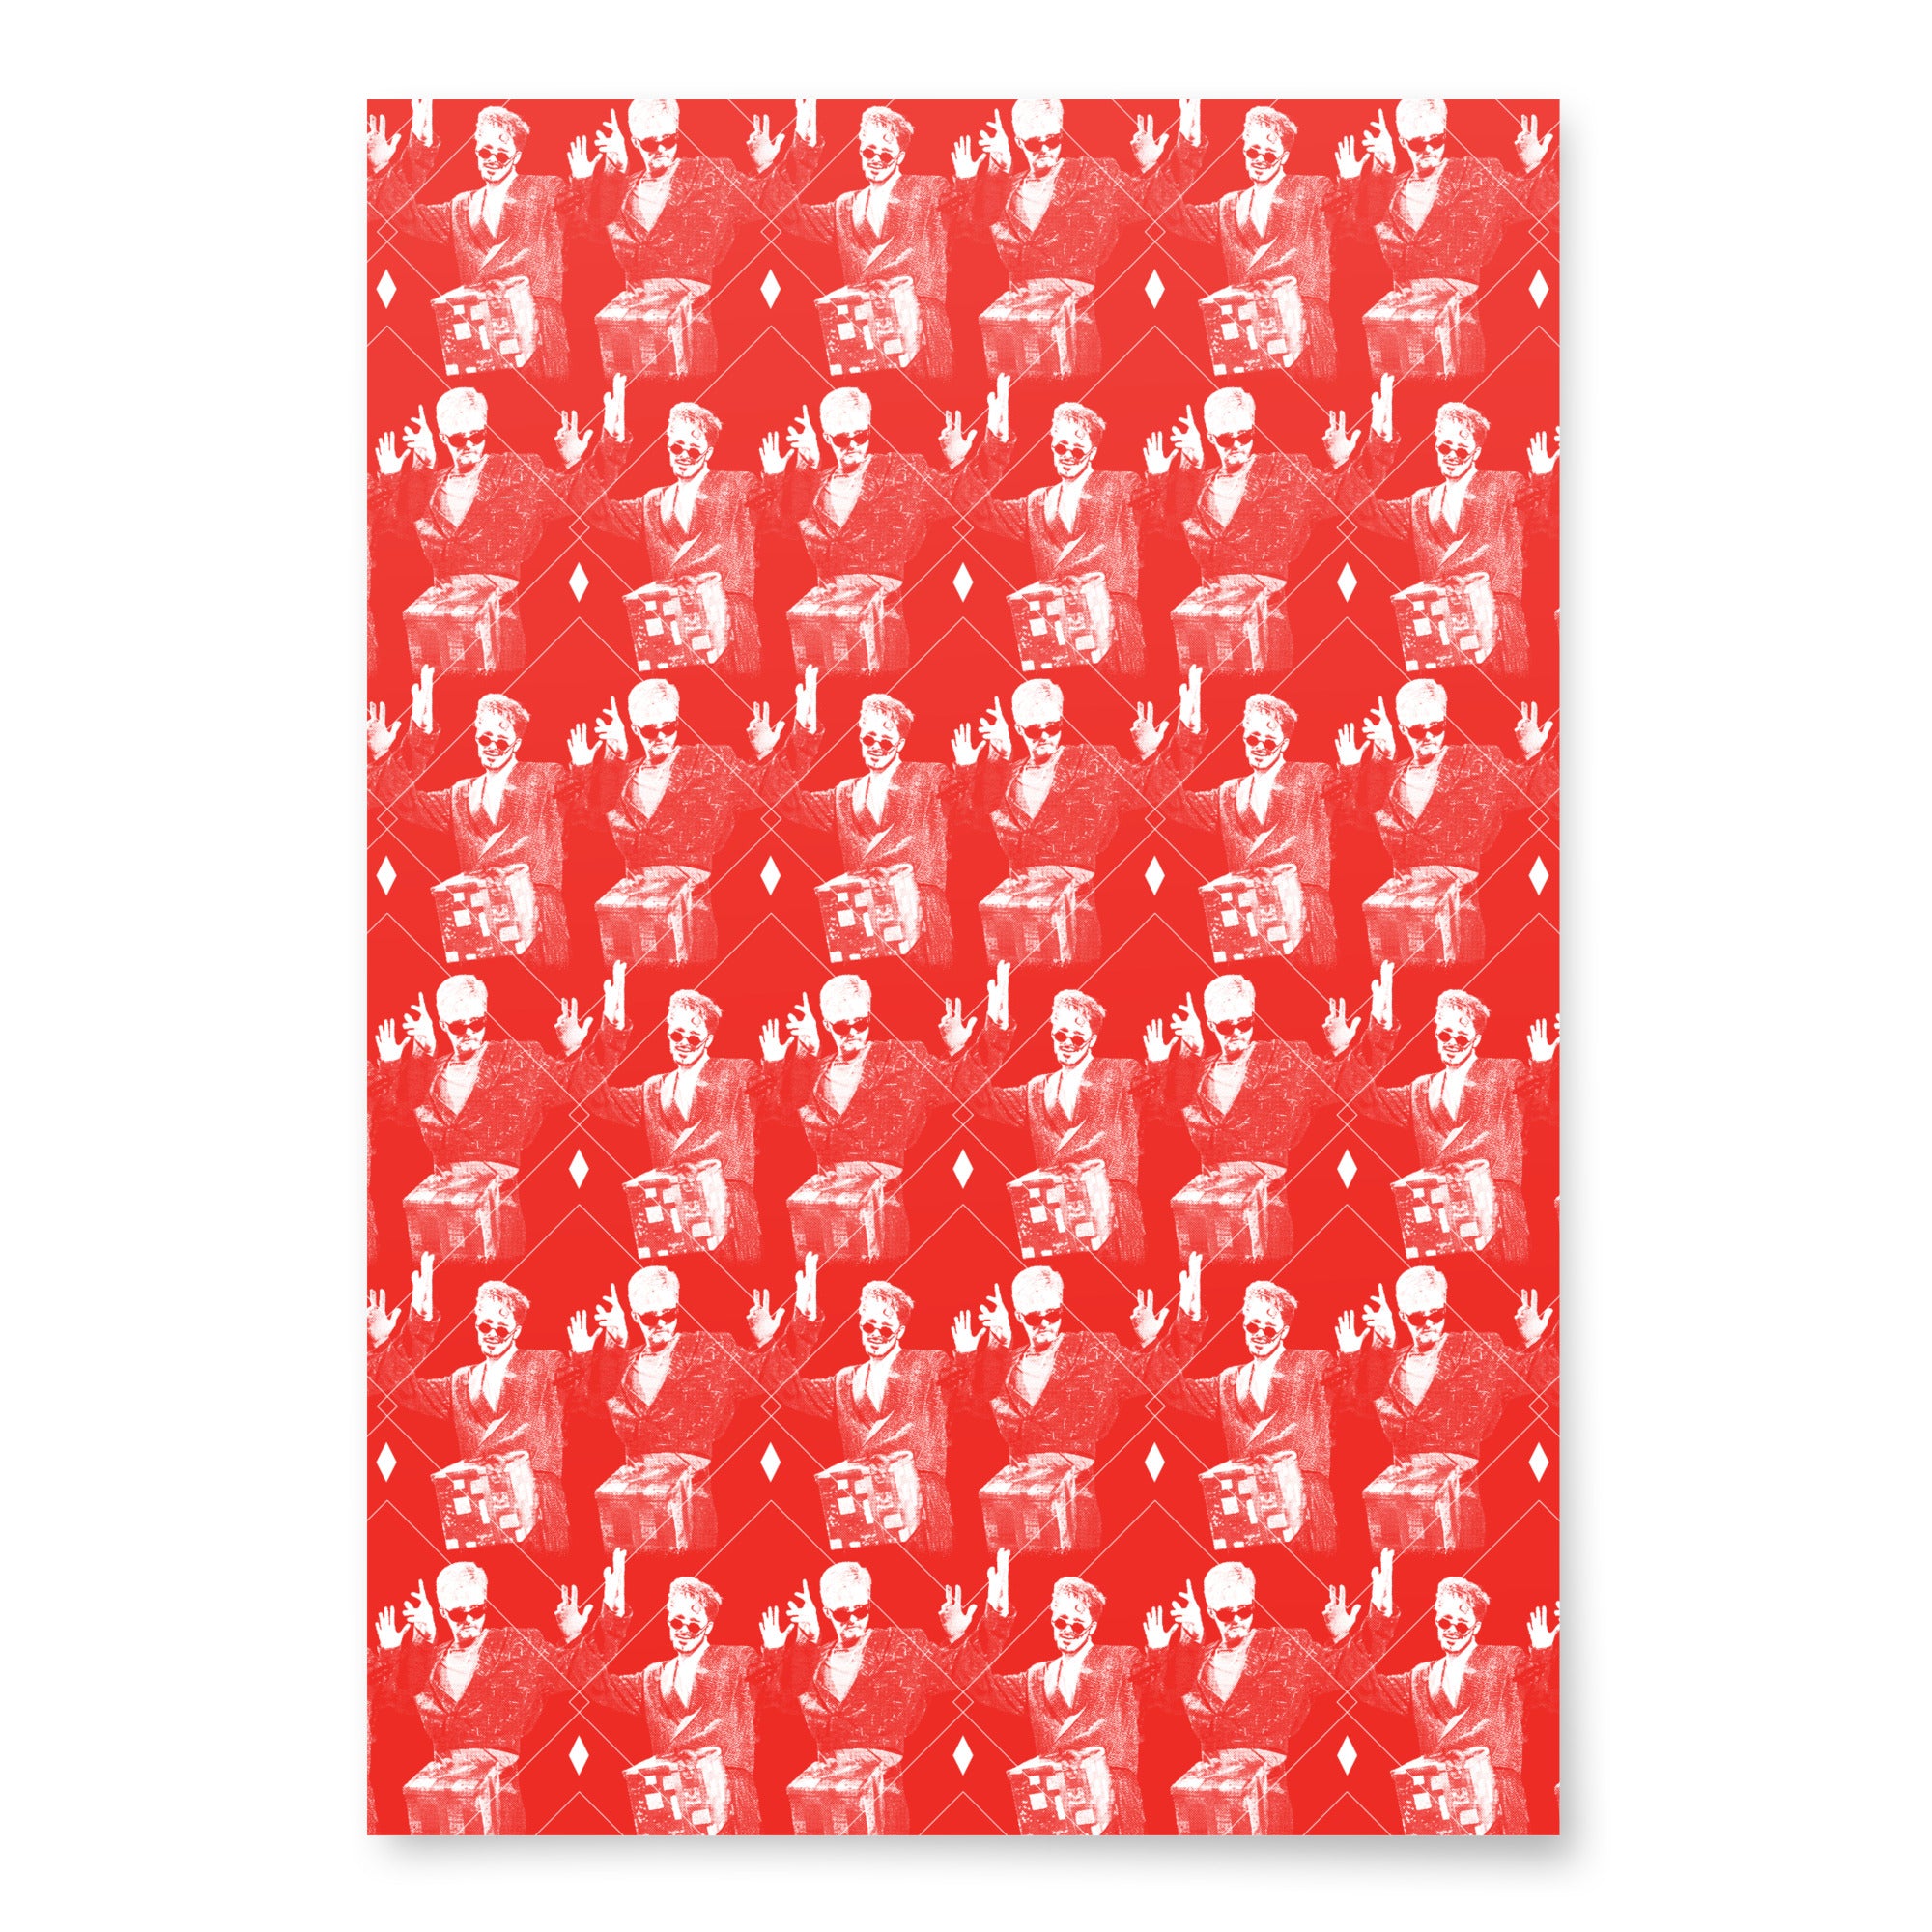 Dick in a Box - Wrapping Paper Sheets (3)